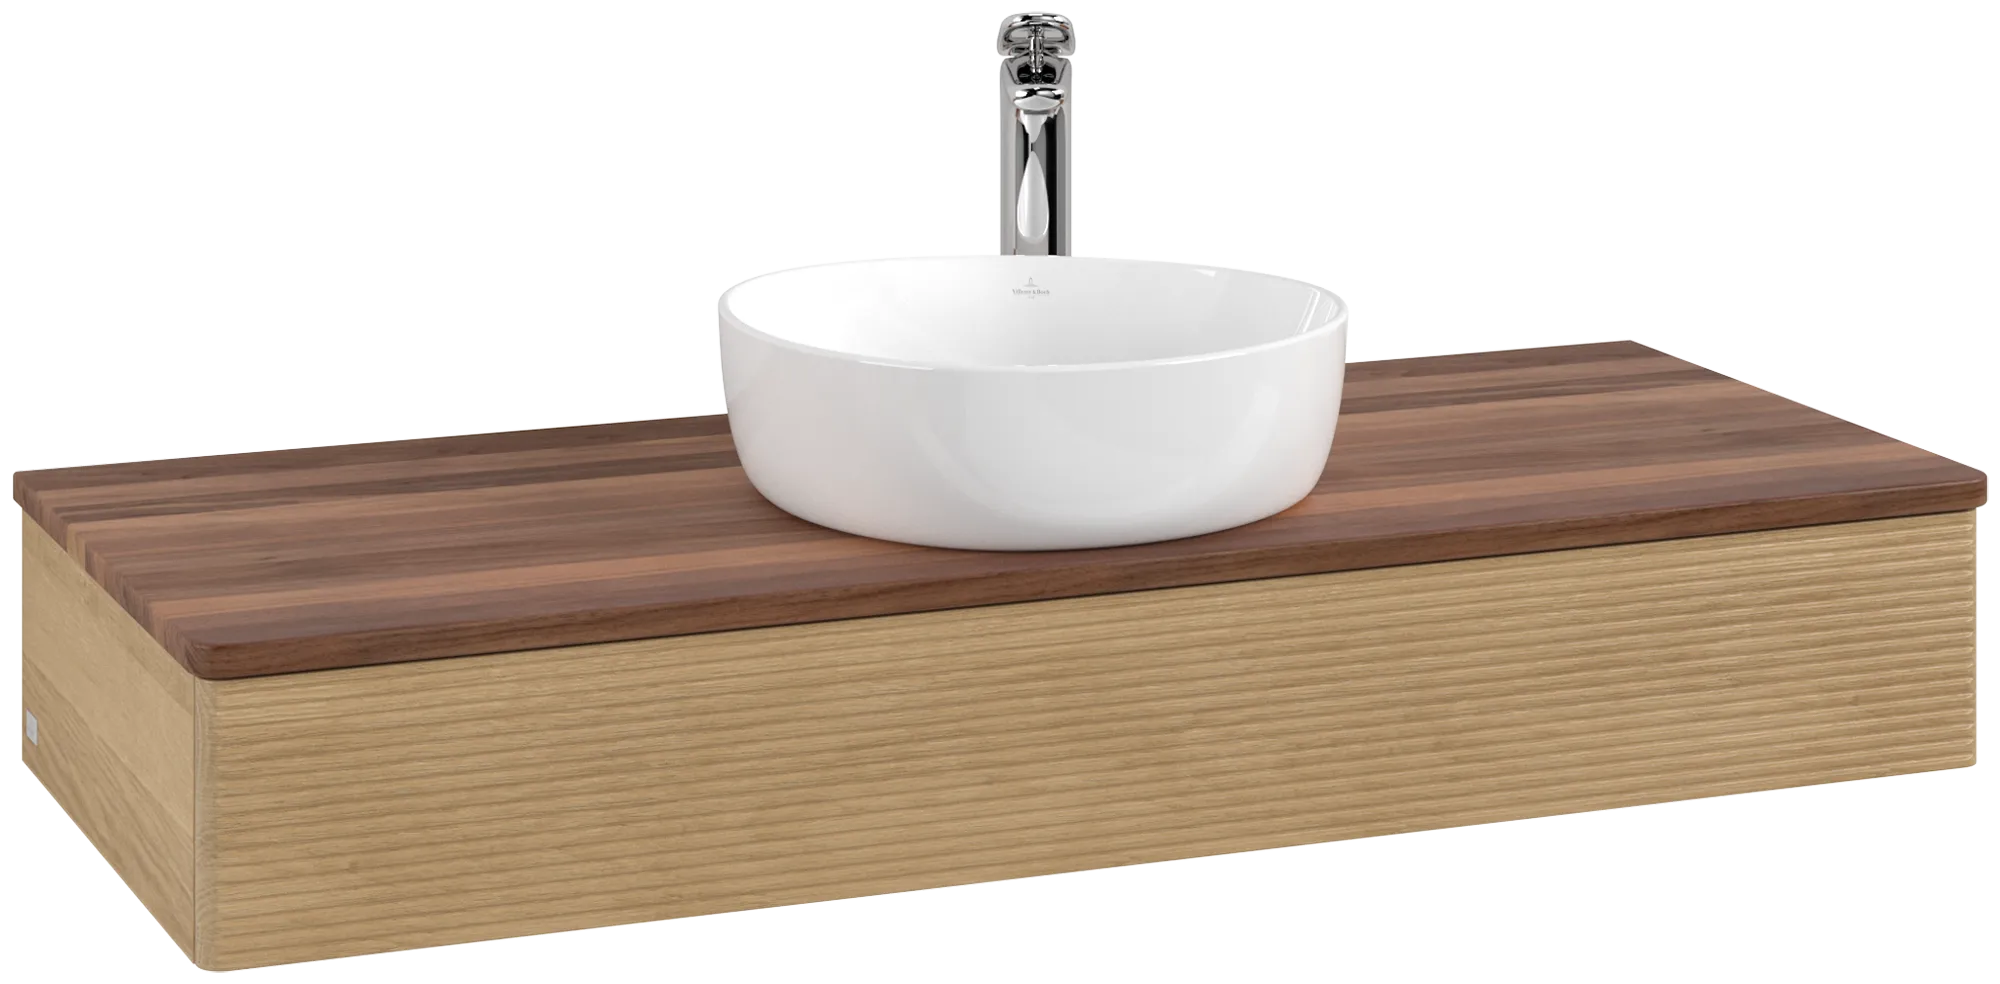 Picture of VILLEROY BOCH Antao Vanity unit, 1 pull-out compartment, 1200 x 190 x 500 mm, Front with grain texture, Honey Oak / Warm Walnut #K10152HN